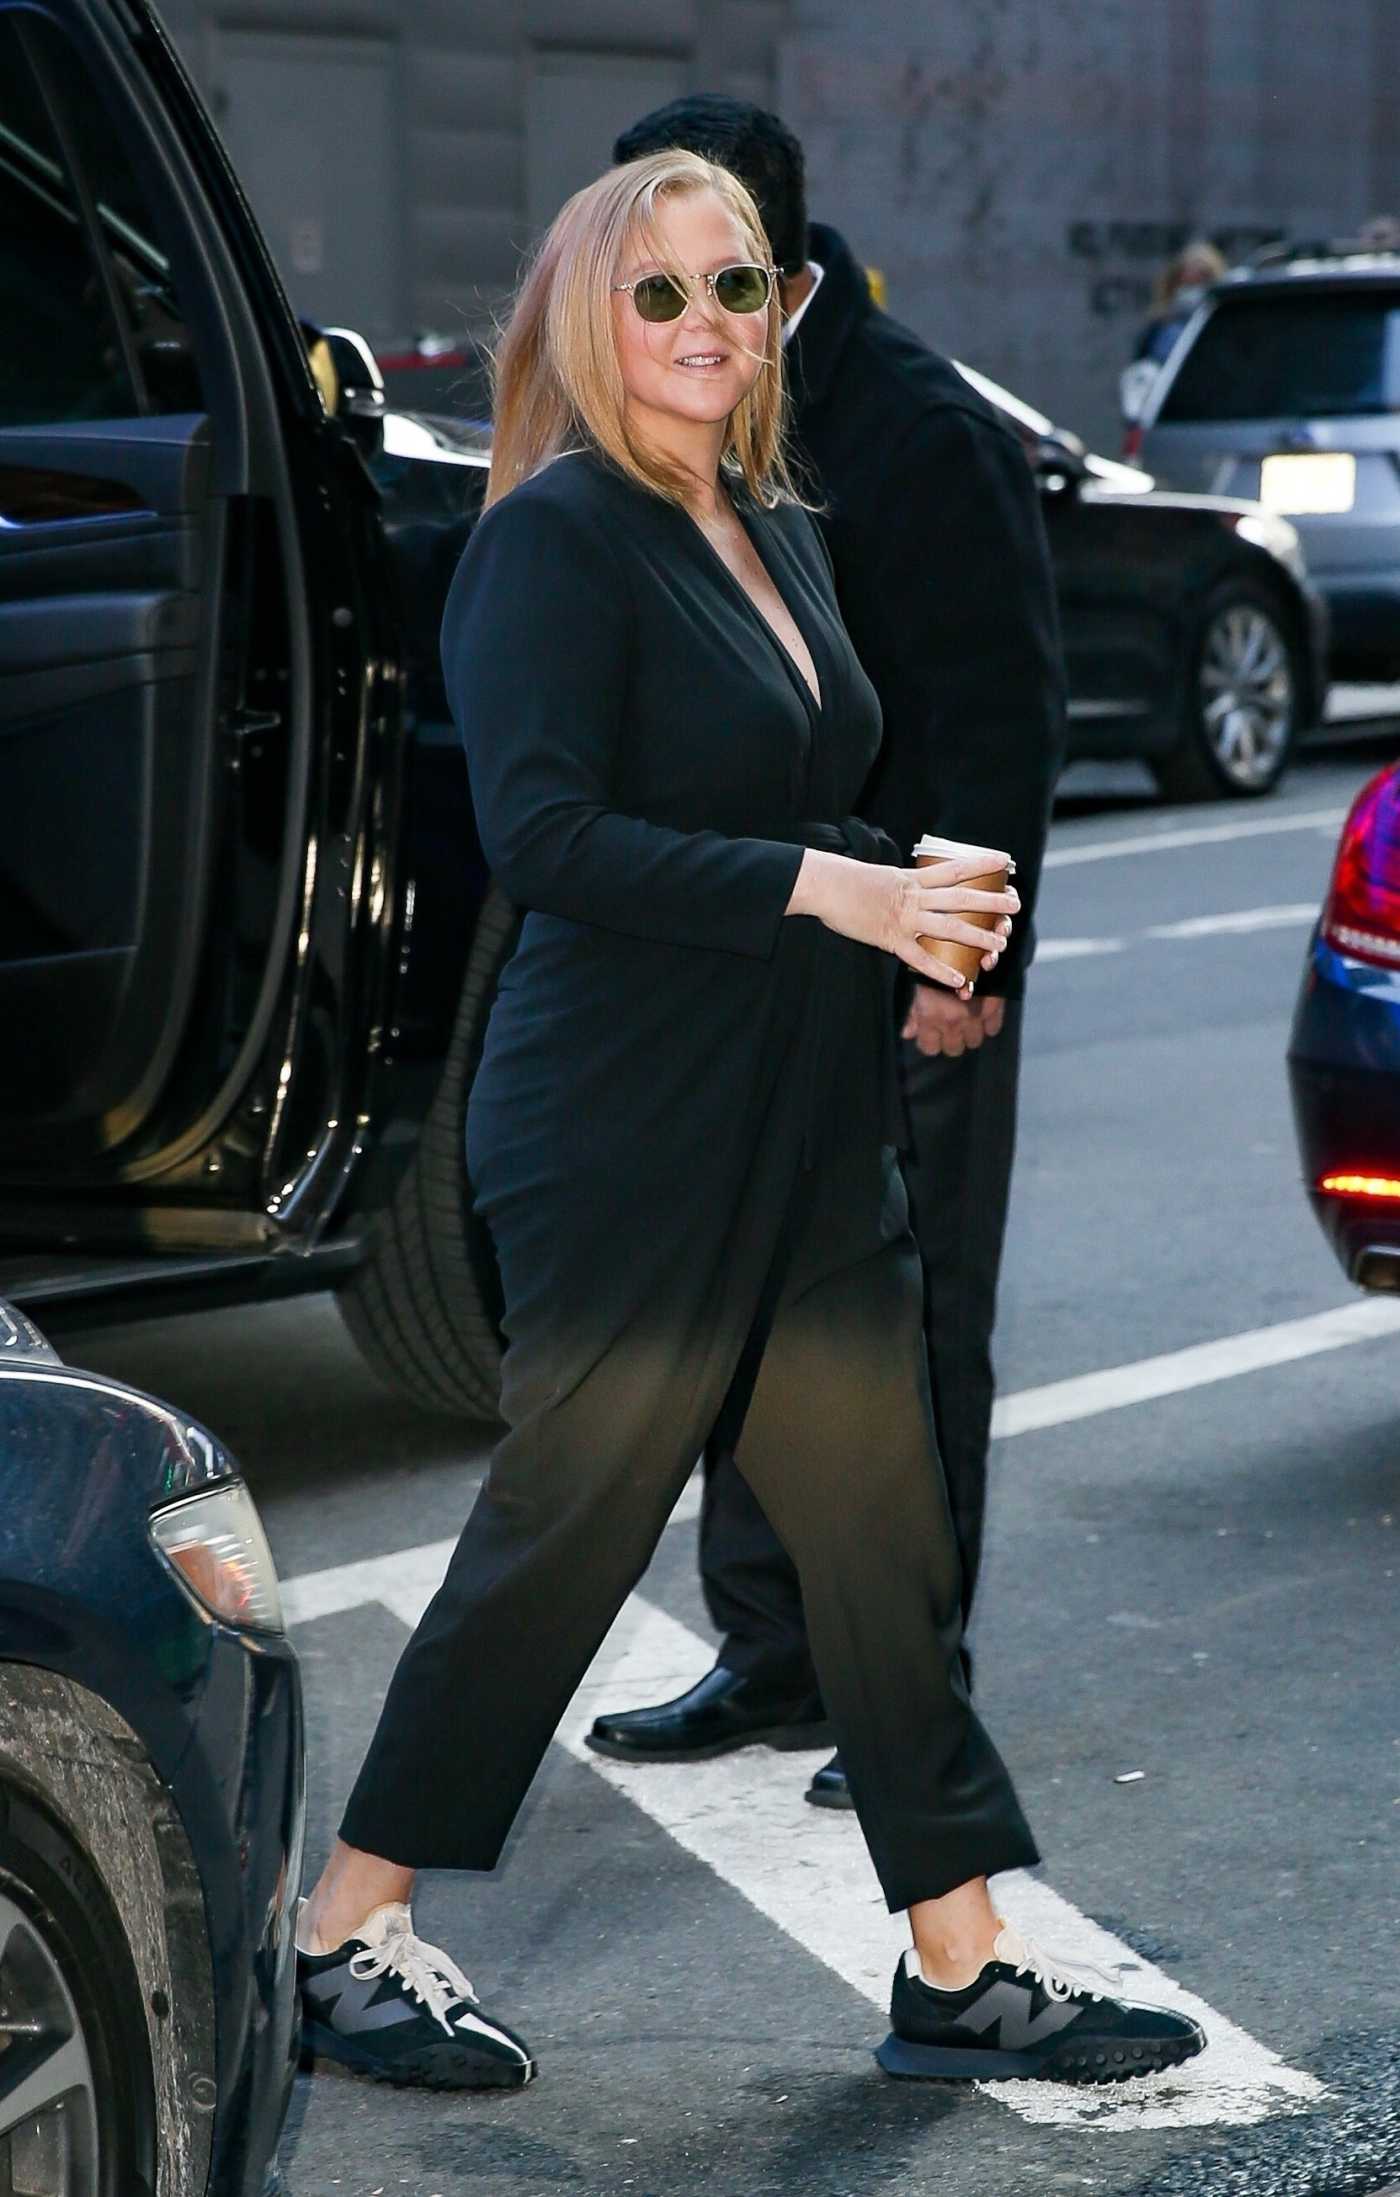 Amy Schumer in a Black Ensemble Arrives at Good Morning America in New York 03/16/2022